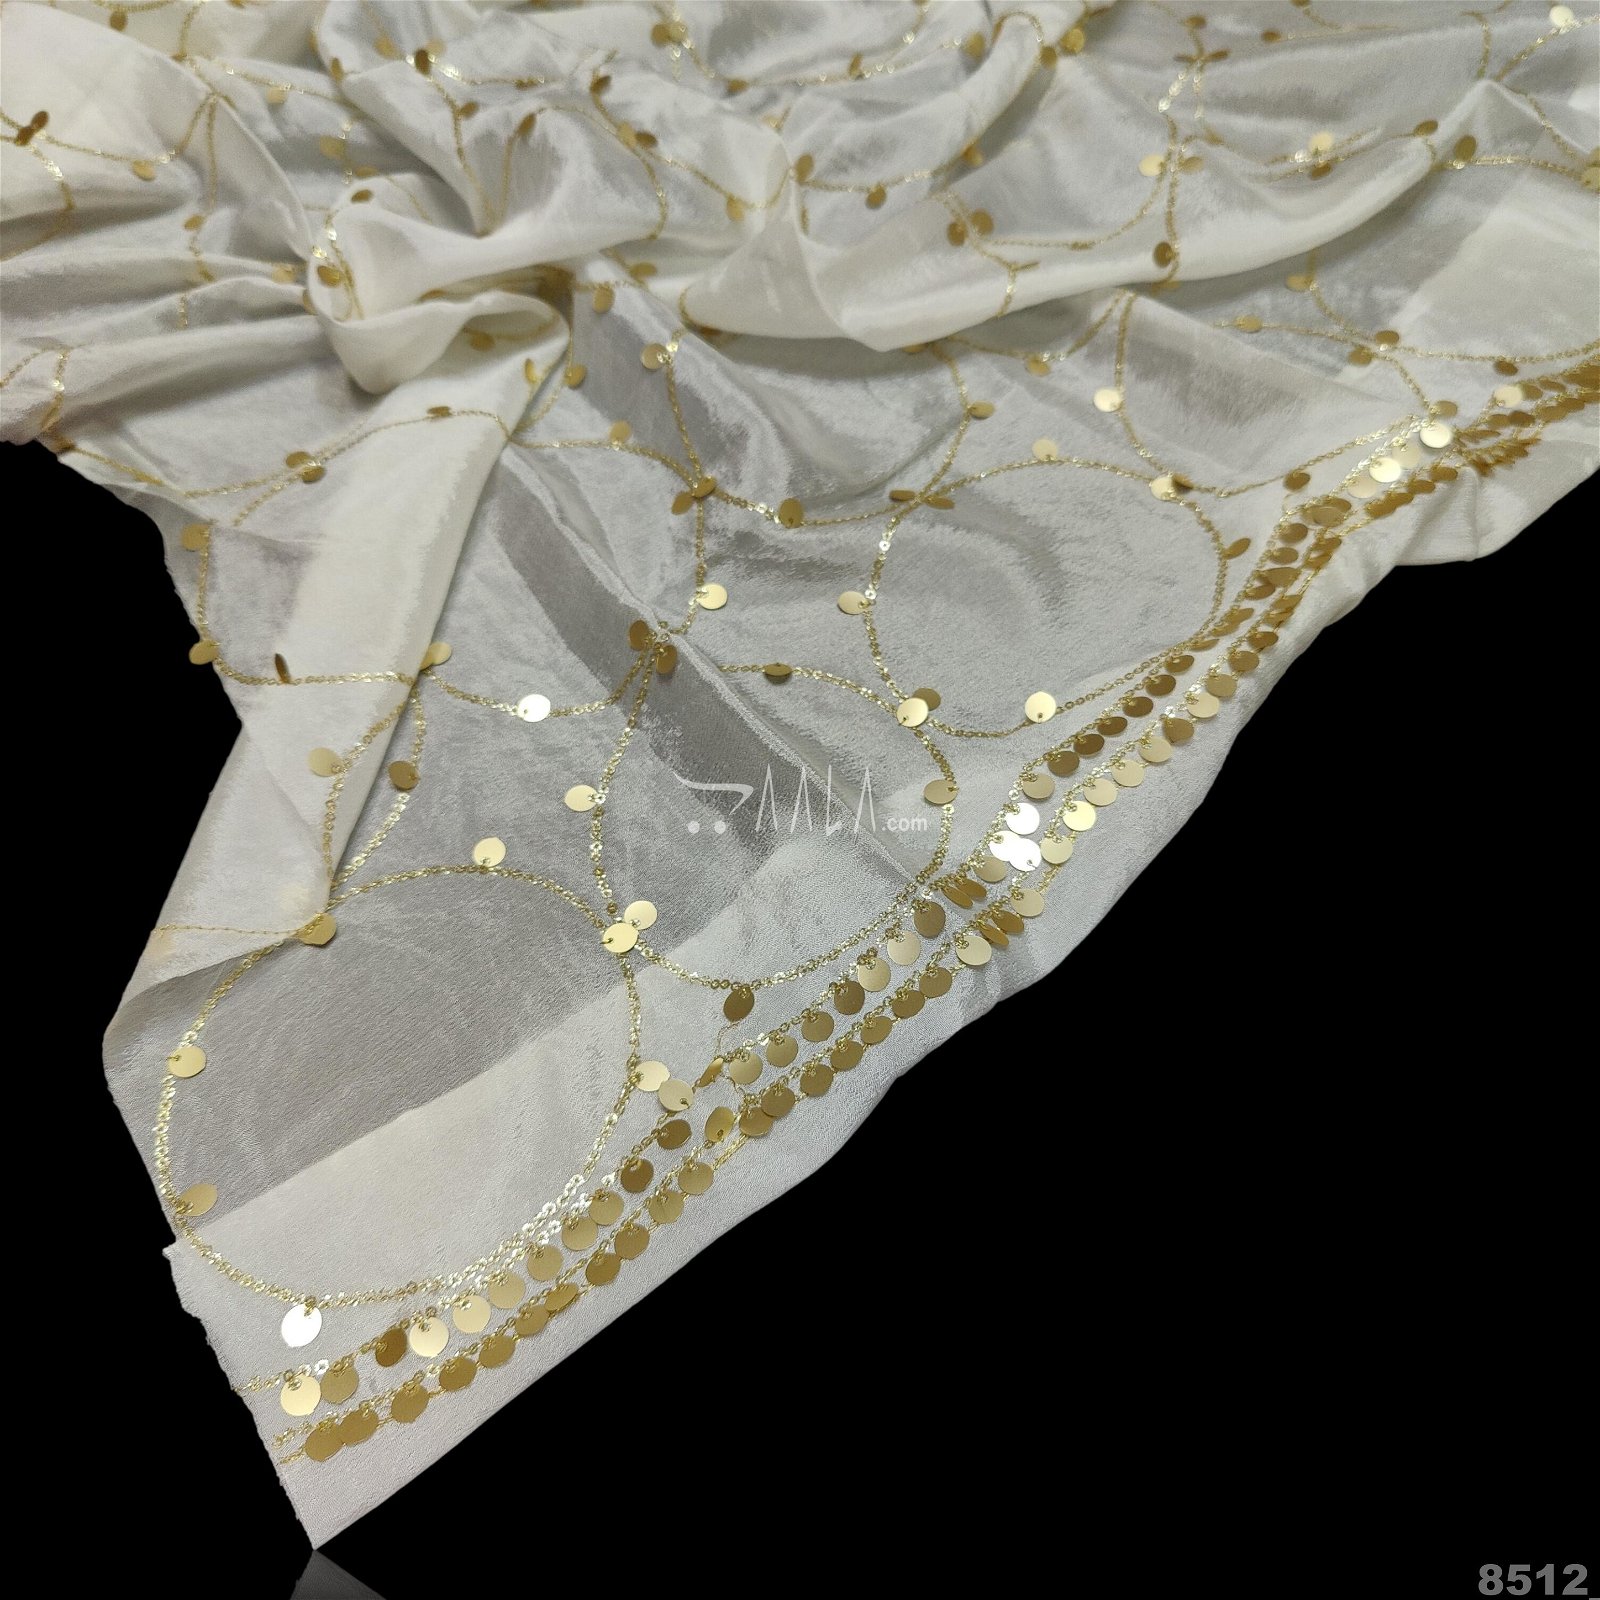 Embroidered Crepe-Chiffon Viscose Dupatta-40-Inches DYEABLE 2.50-Metres #8512